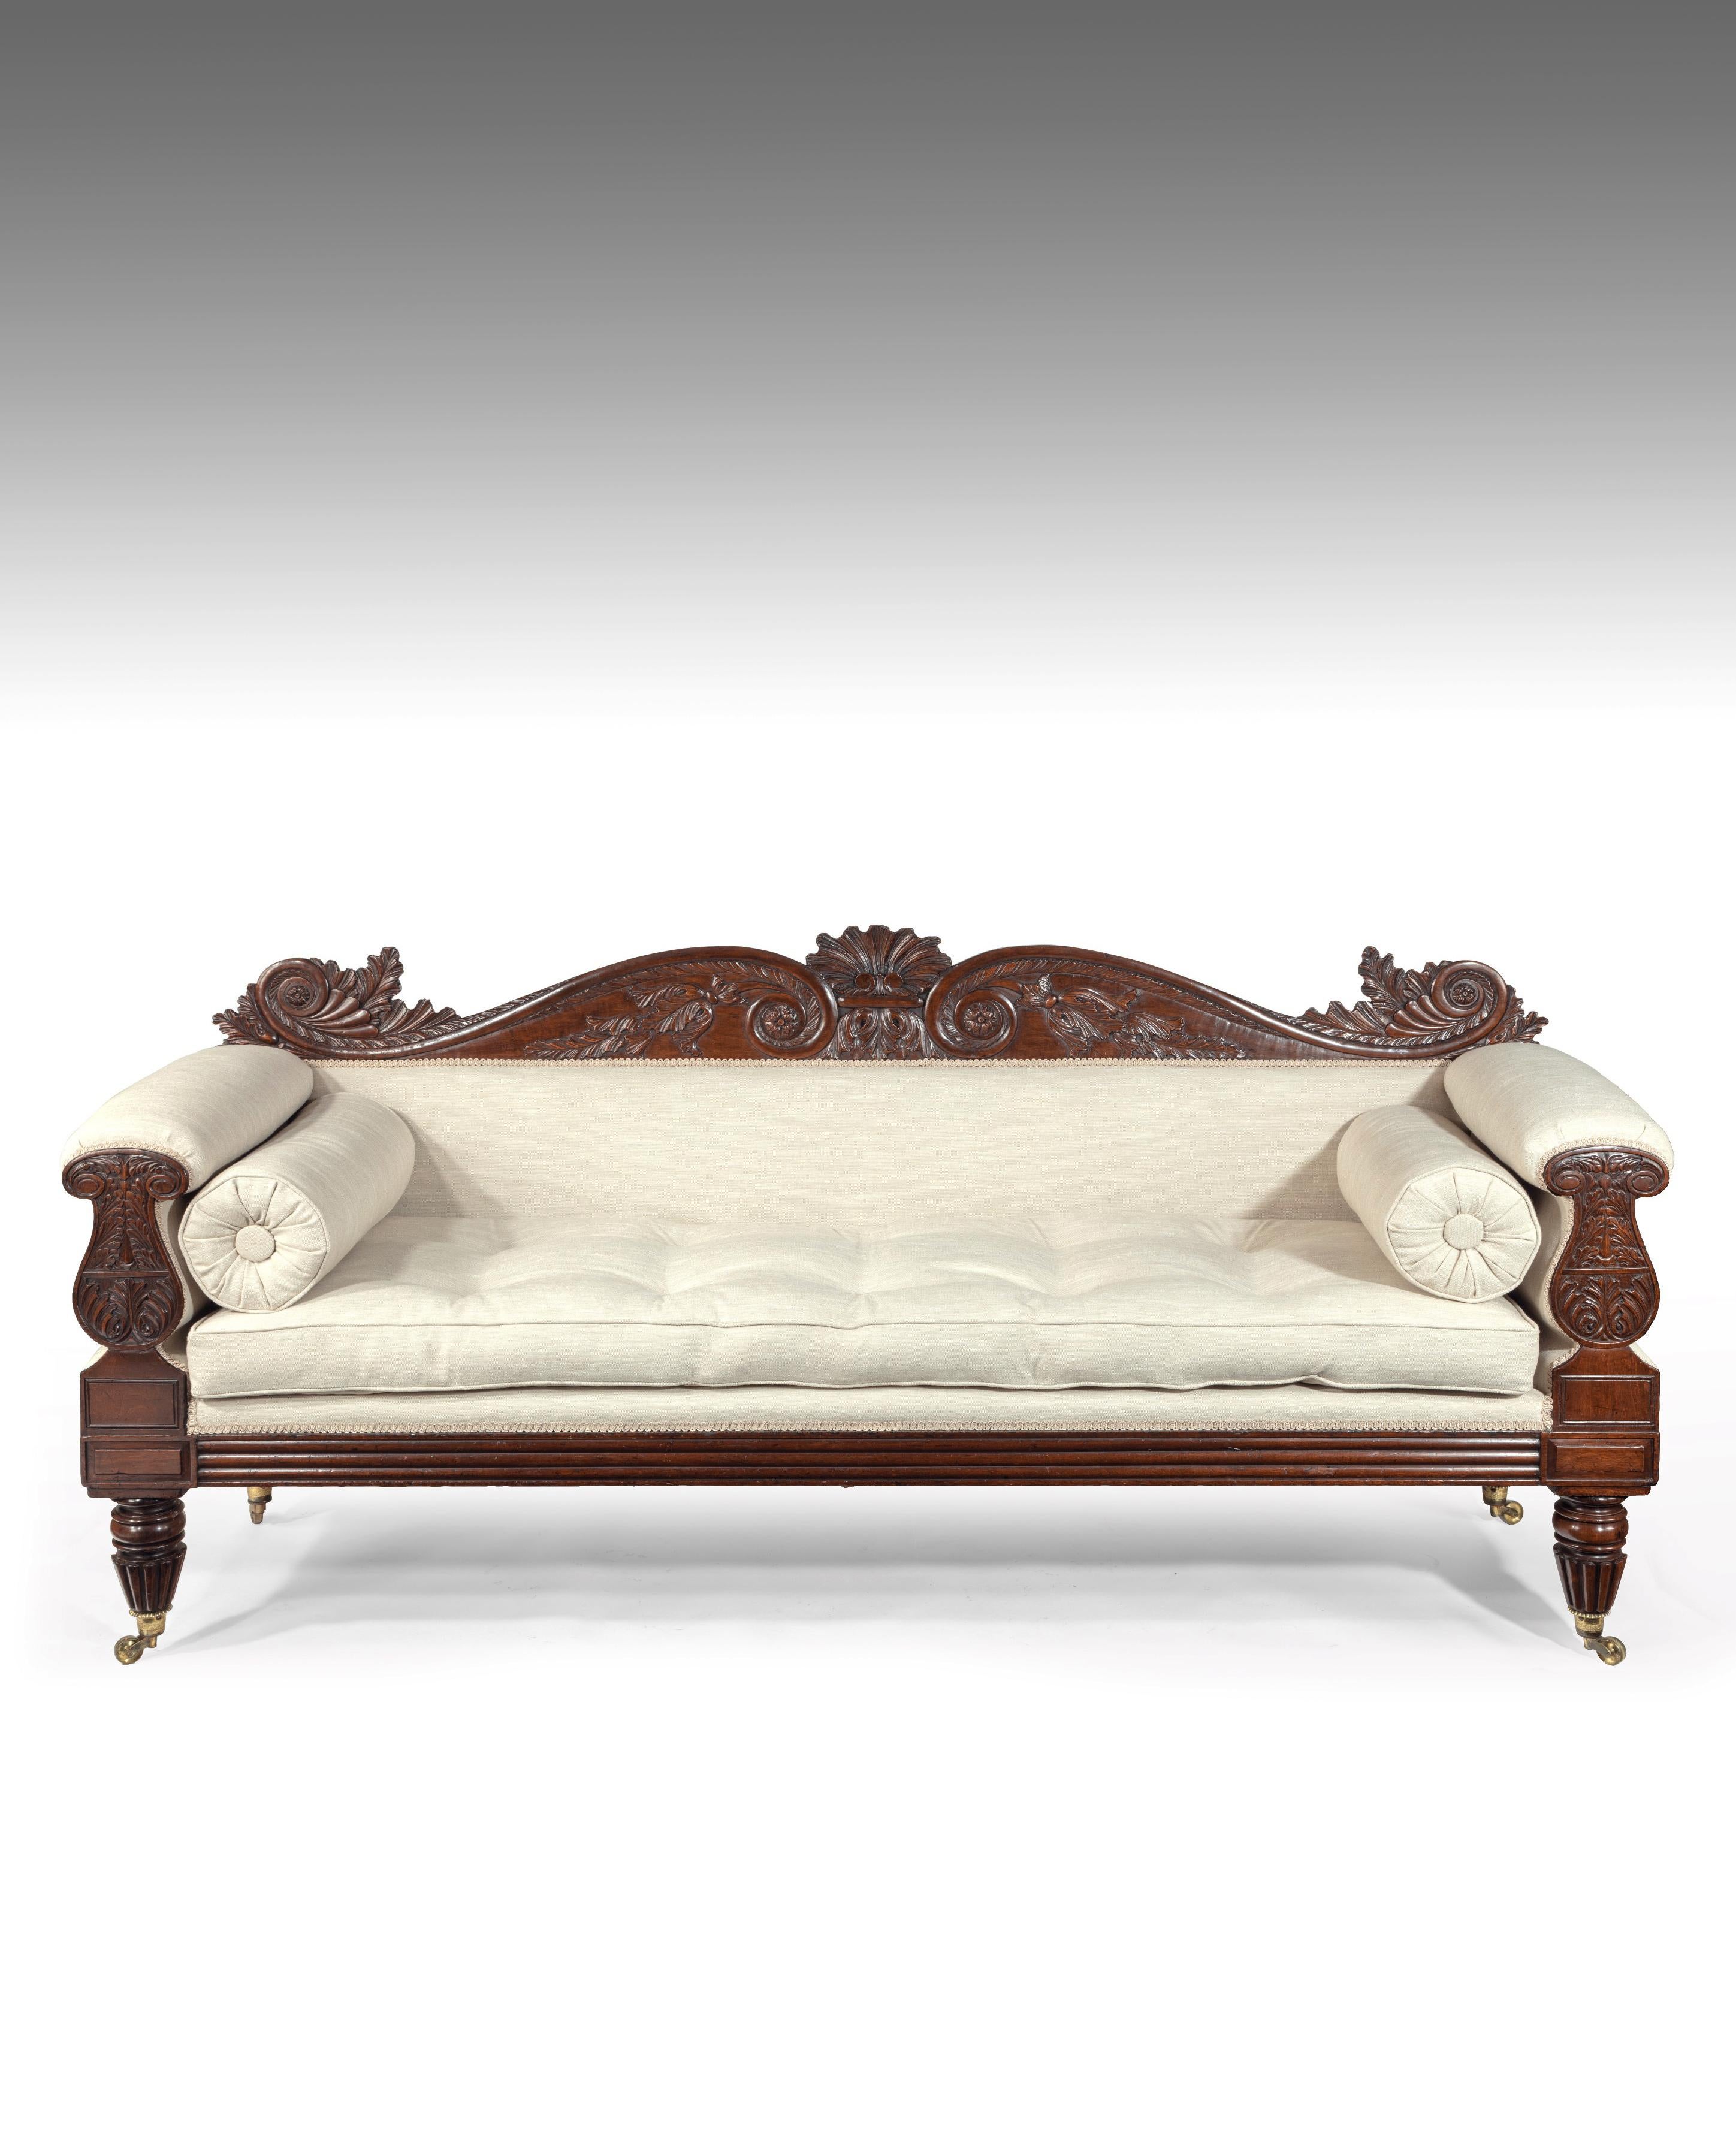 A fine quality late Regency / William IV mahogany sofa newly upholstered in a high quality neutral coloured linen, after a design by John Taylor.

English, circa 1830.

The fine foliate and acanthus leaf carved double scrolled top rail with